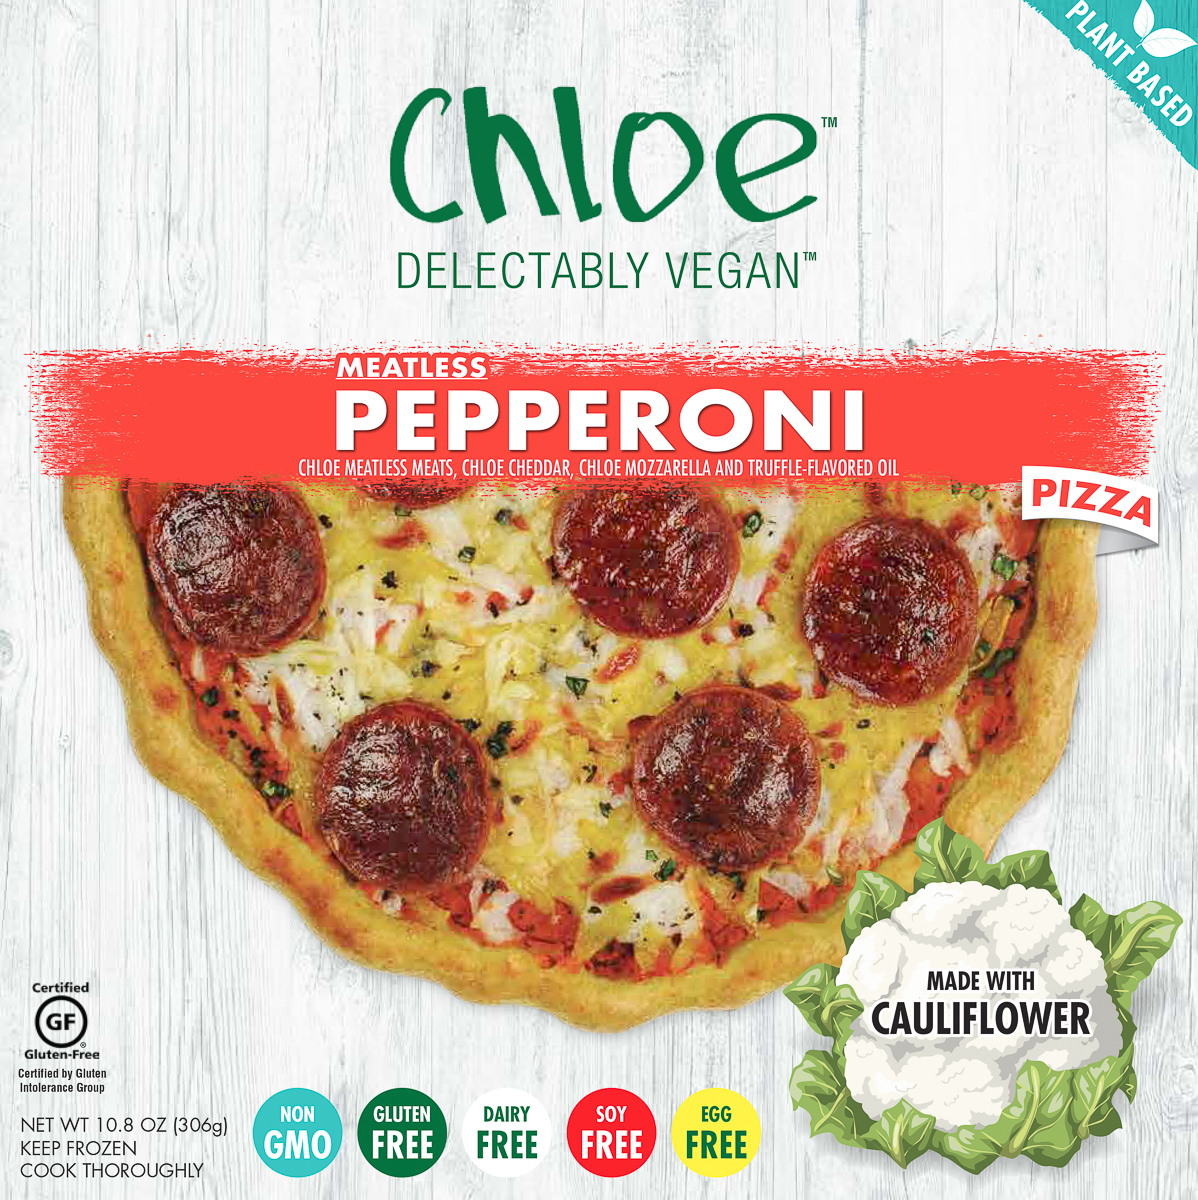 Meatless Pepperoni Pizza